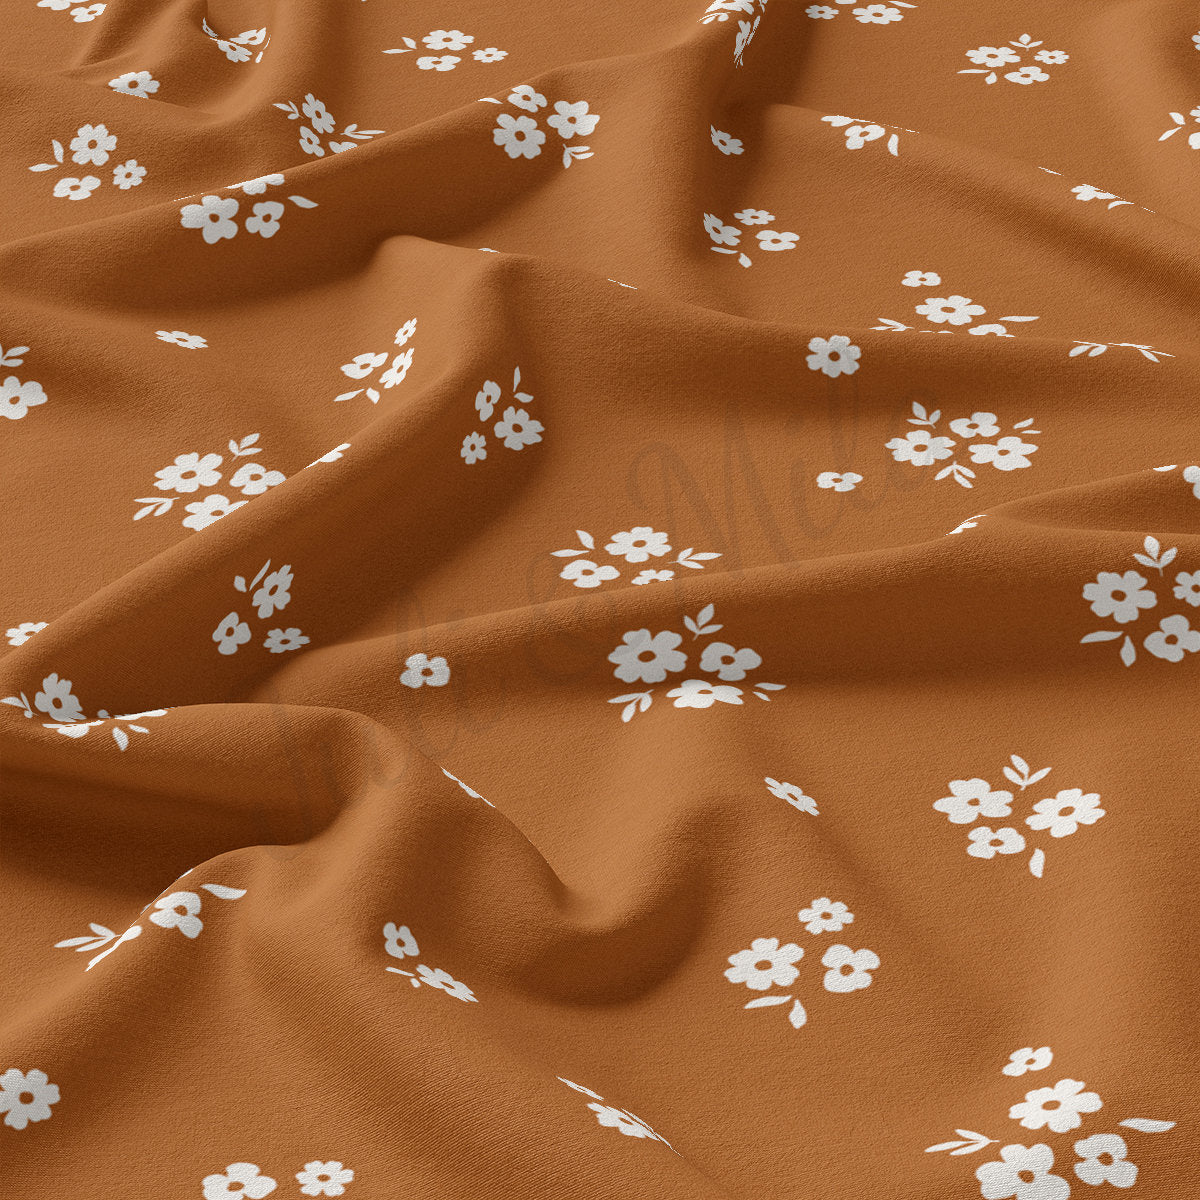 Floral DBP Fabric Double Brushed Polyester Fabric by the Yard DBP Jersey Stretchy Soft Polyester Stretch Fabric DBP2161